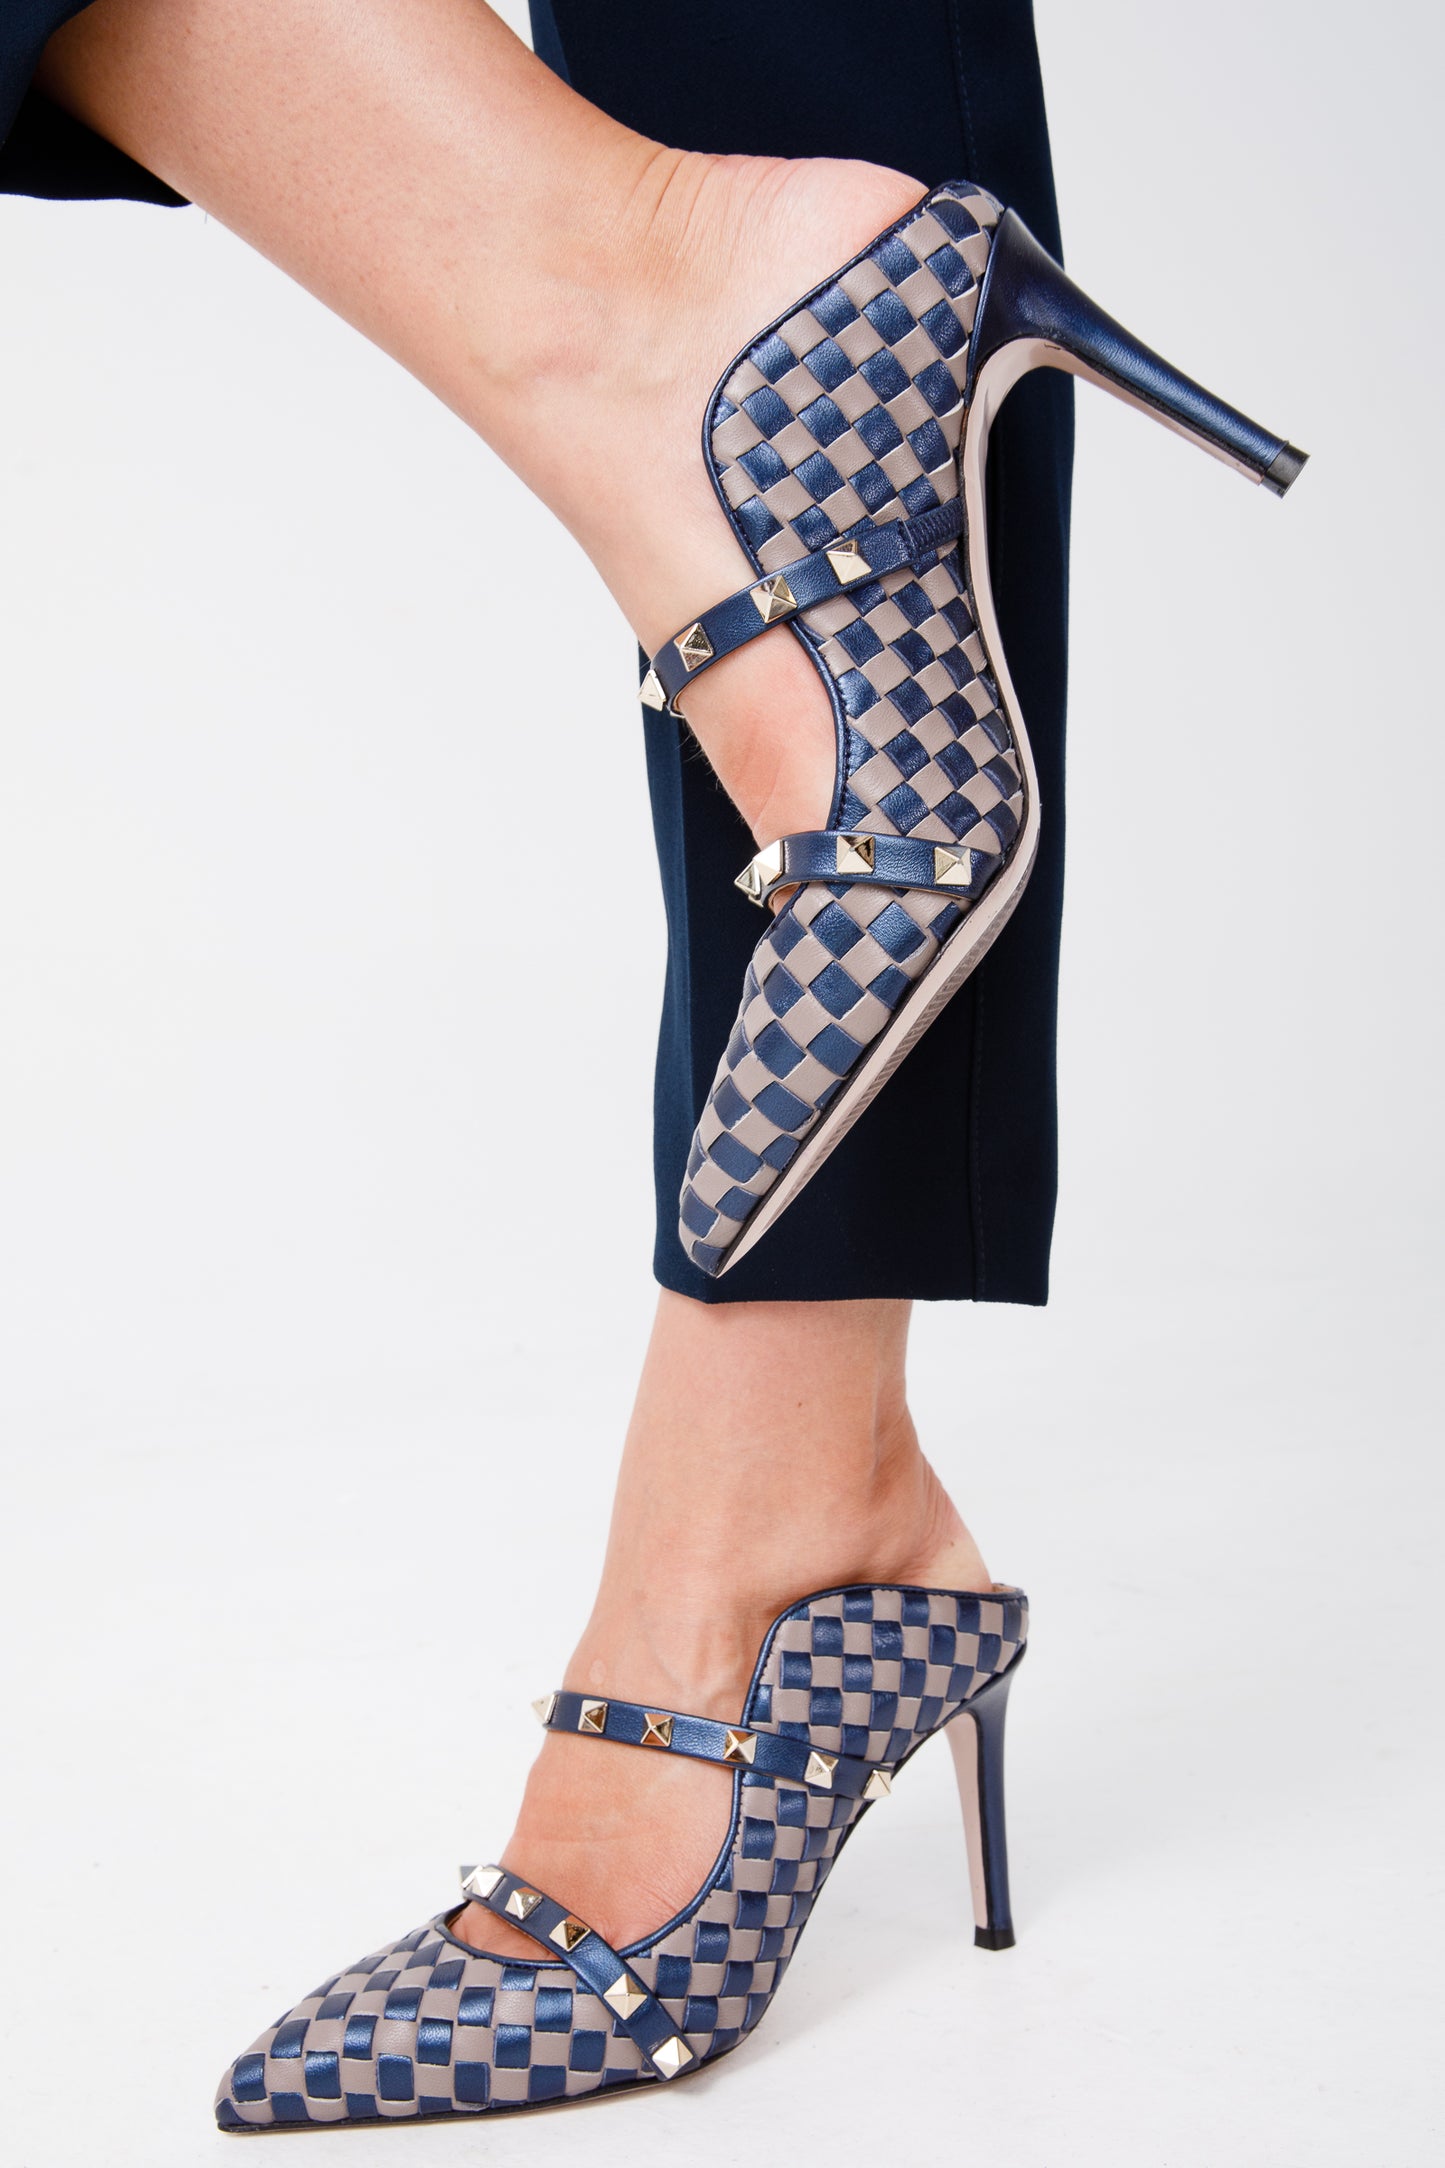 The Dosso Navy Blue Handwoven Pointy Toe Leather Women Sandal